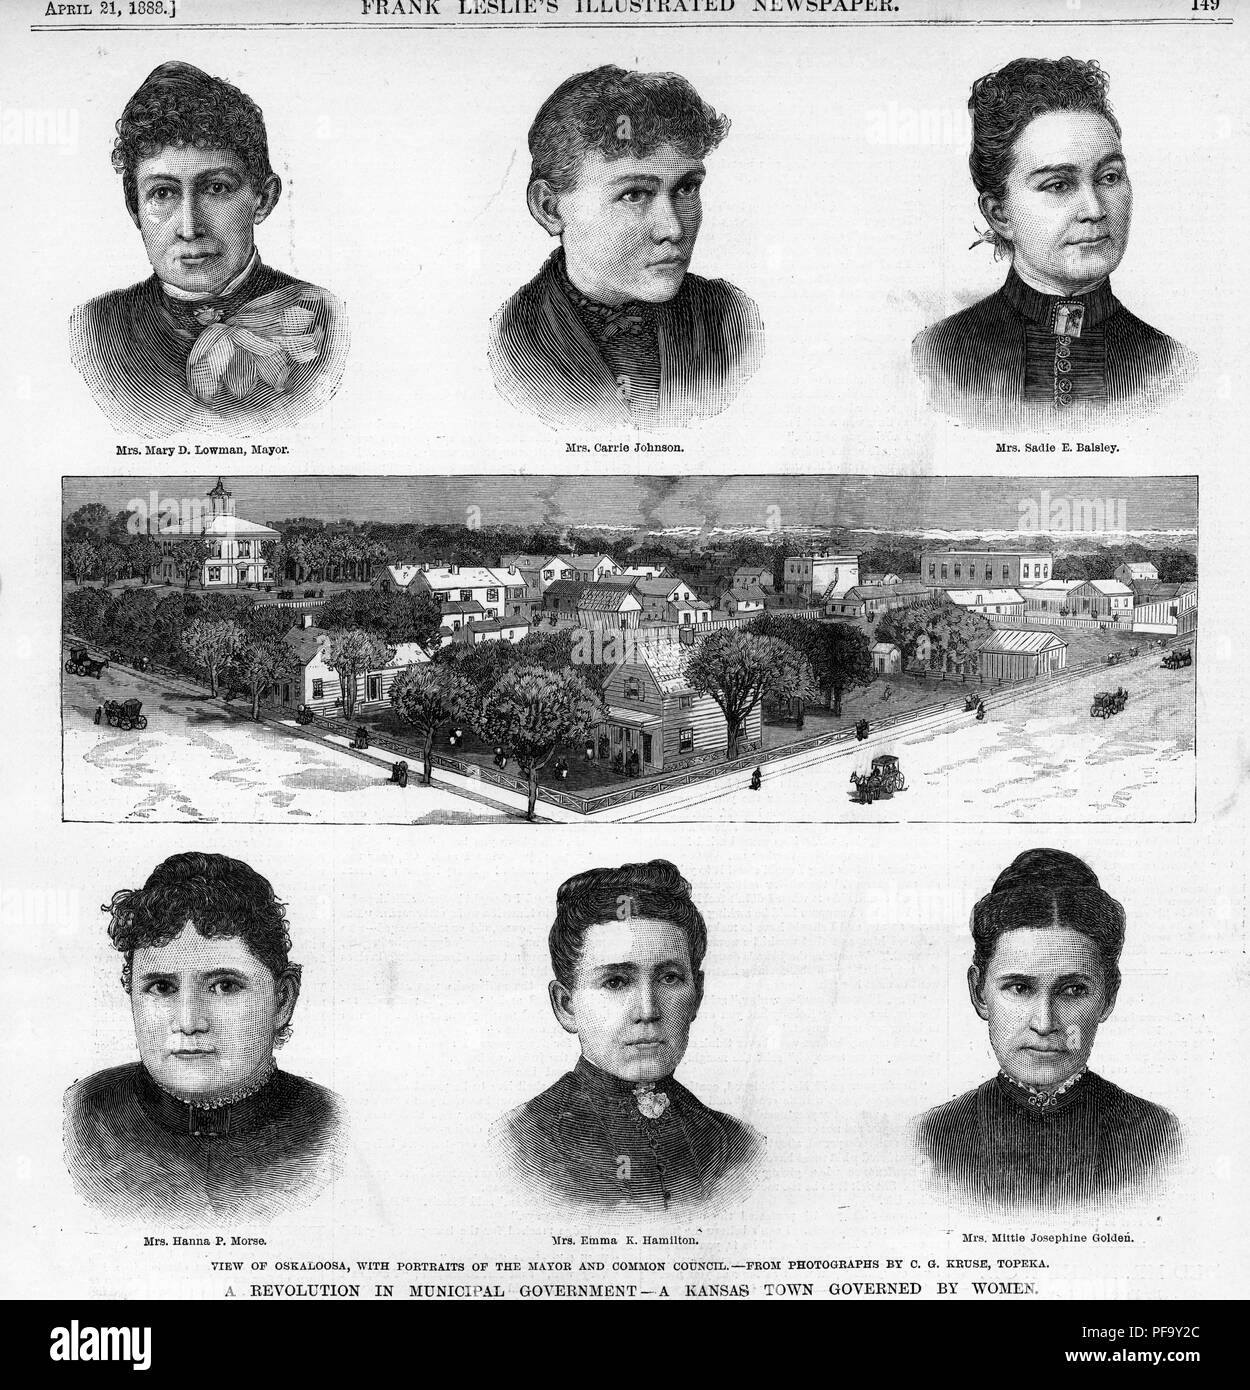 Black and white print depicting a panoramic view of Oskaloosa, Kansas, surrounded by portrait sketches of six women who served as the town's Common Council members, including Mrs Mary D Lowman (Mayor) Mrs Carrie Johnson, Mrs Sadie E Balsley, Mrs Hanna P Morse, Mrs Emma K Hamilton, and Mrs Mittie Josephine Golden, illustrated by CG Kruse and published in Frank Leslie's Illustrated Newspaper for the American market, 1888. () Stock Photo